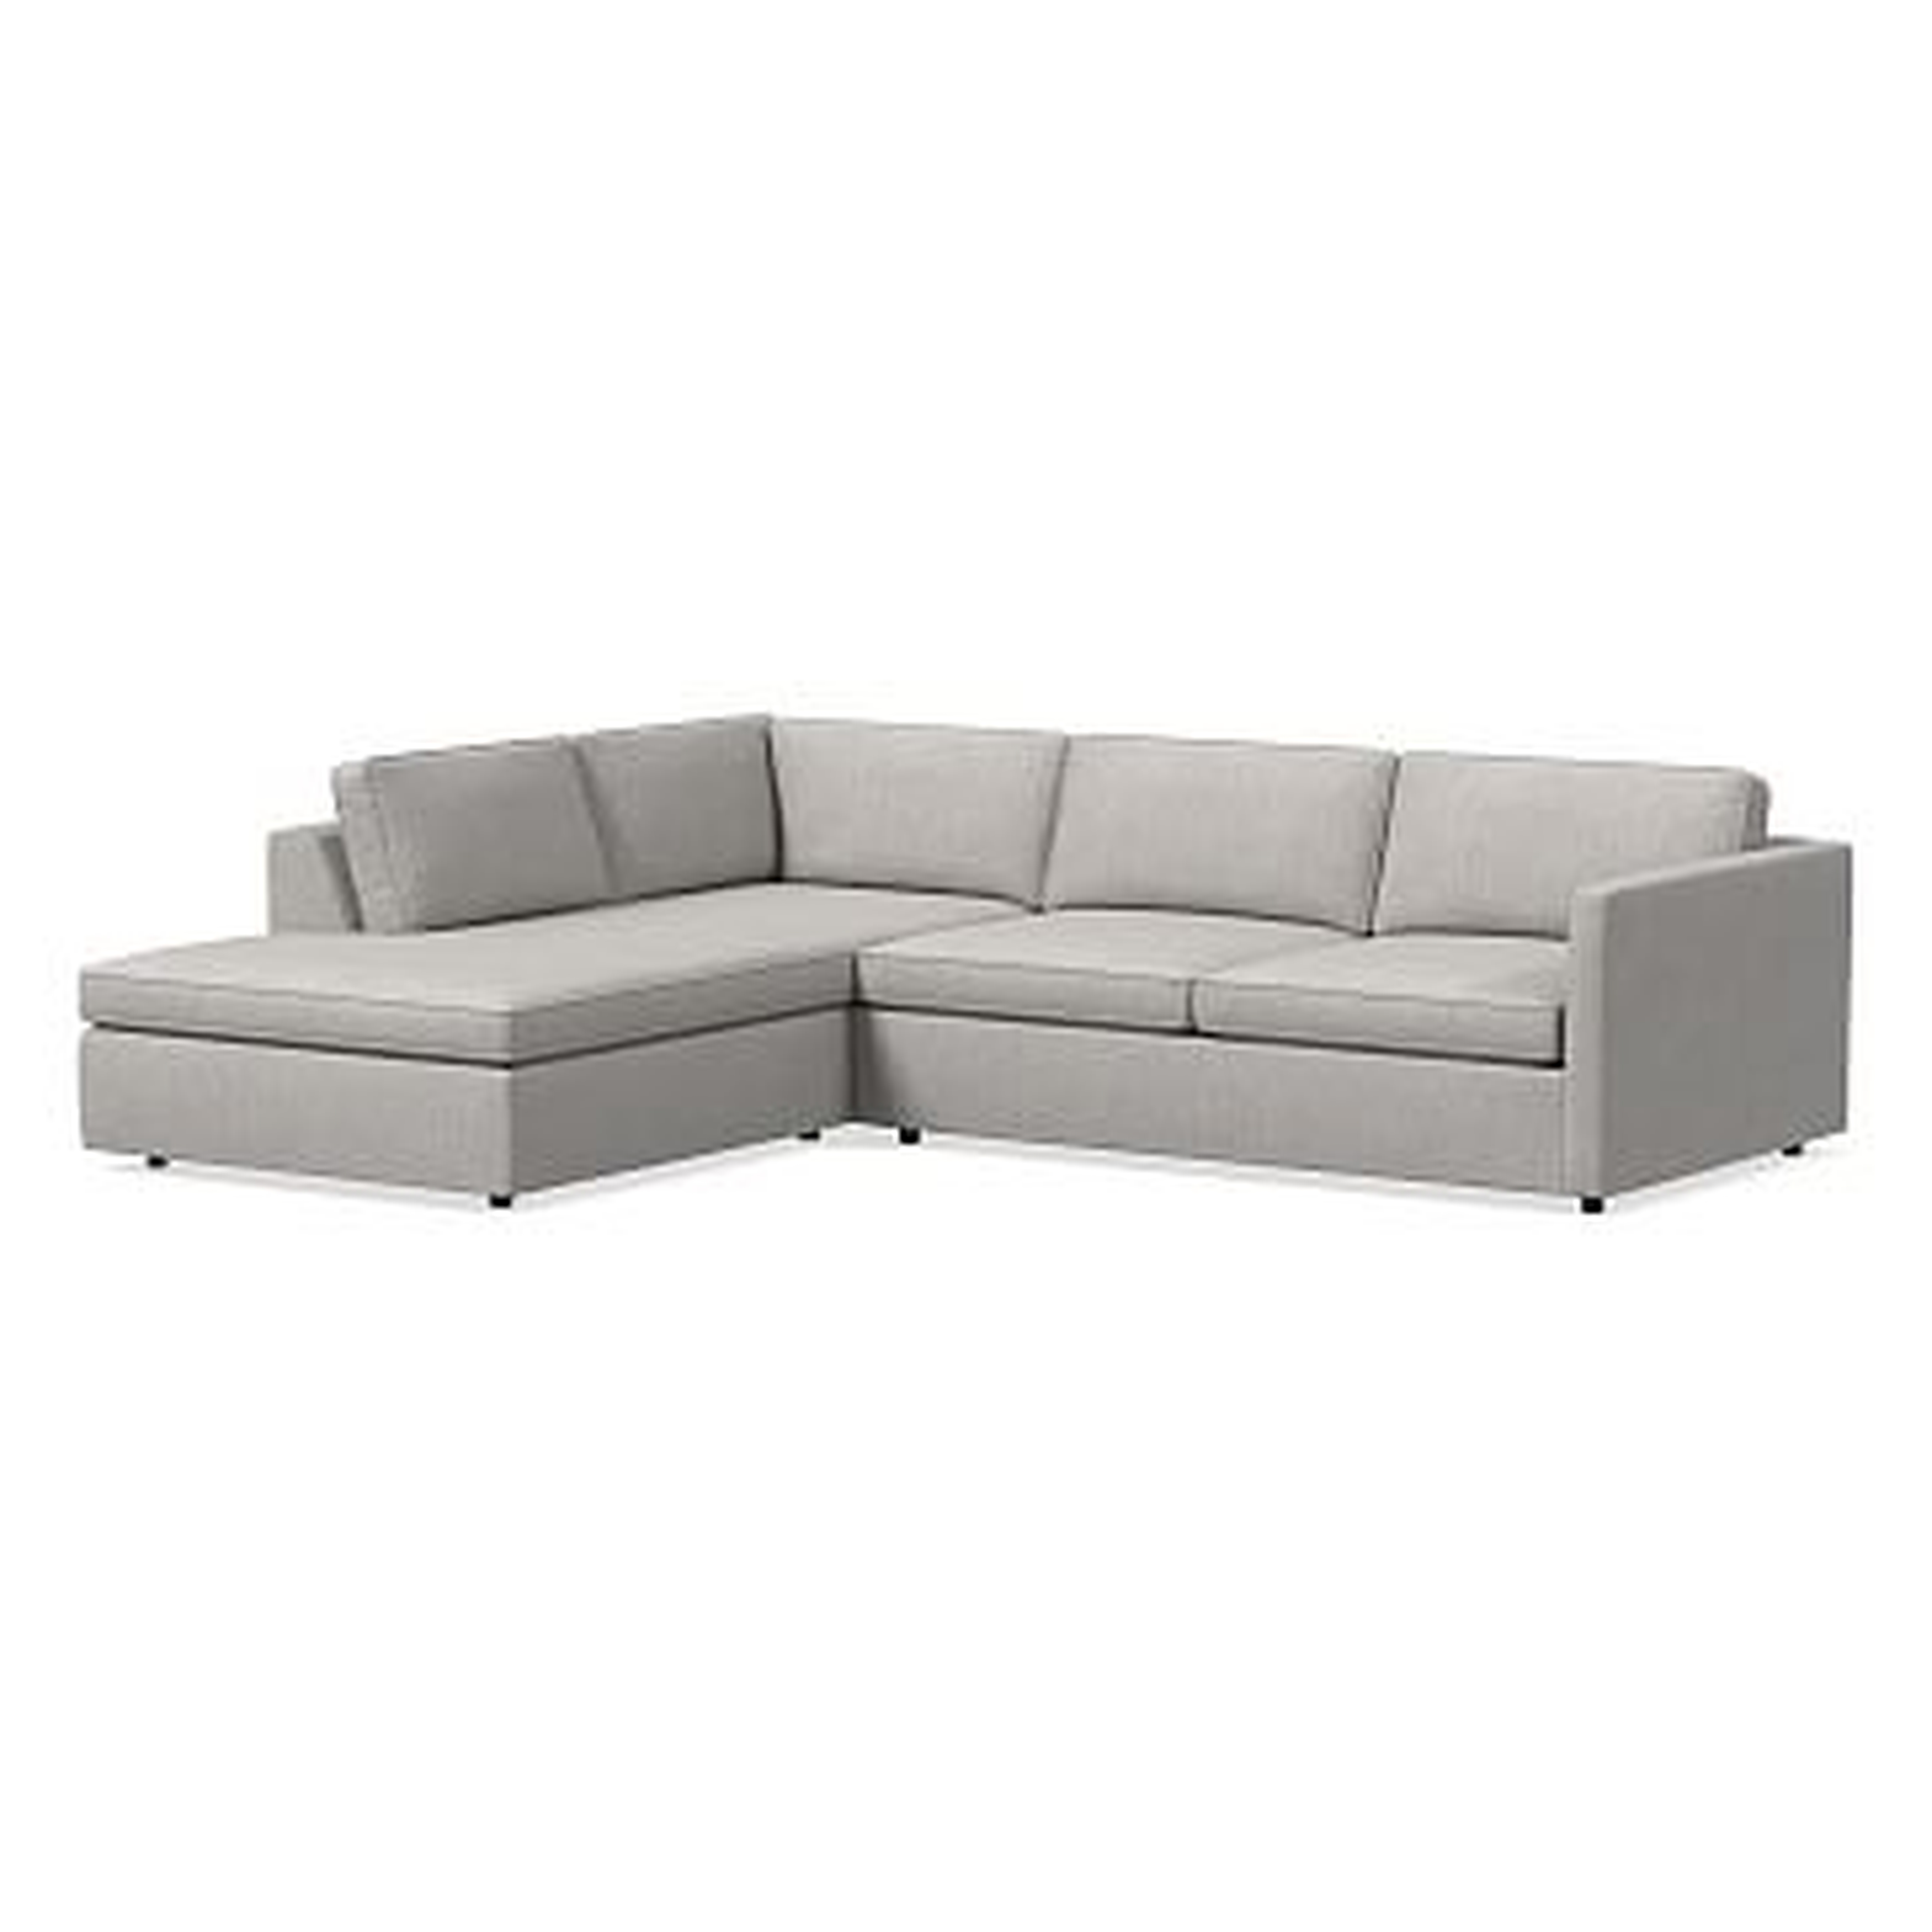 Harris Sectional Set 27: XL RA 75" Sofa, XL LA Terminal Chaise, Poly, Performance Coastal Linen, Storm Gray, Concealed Supports - West Elm